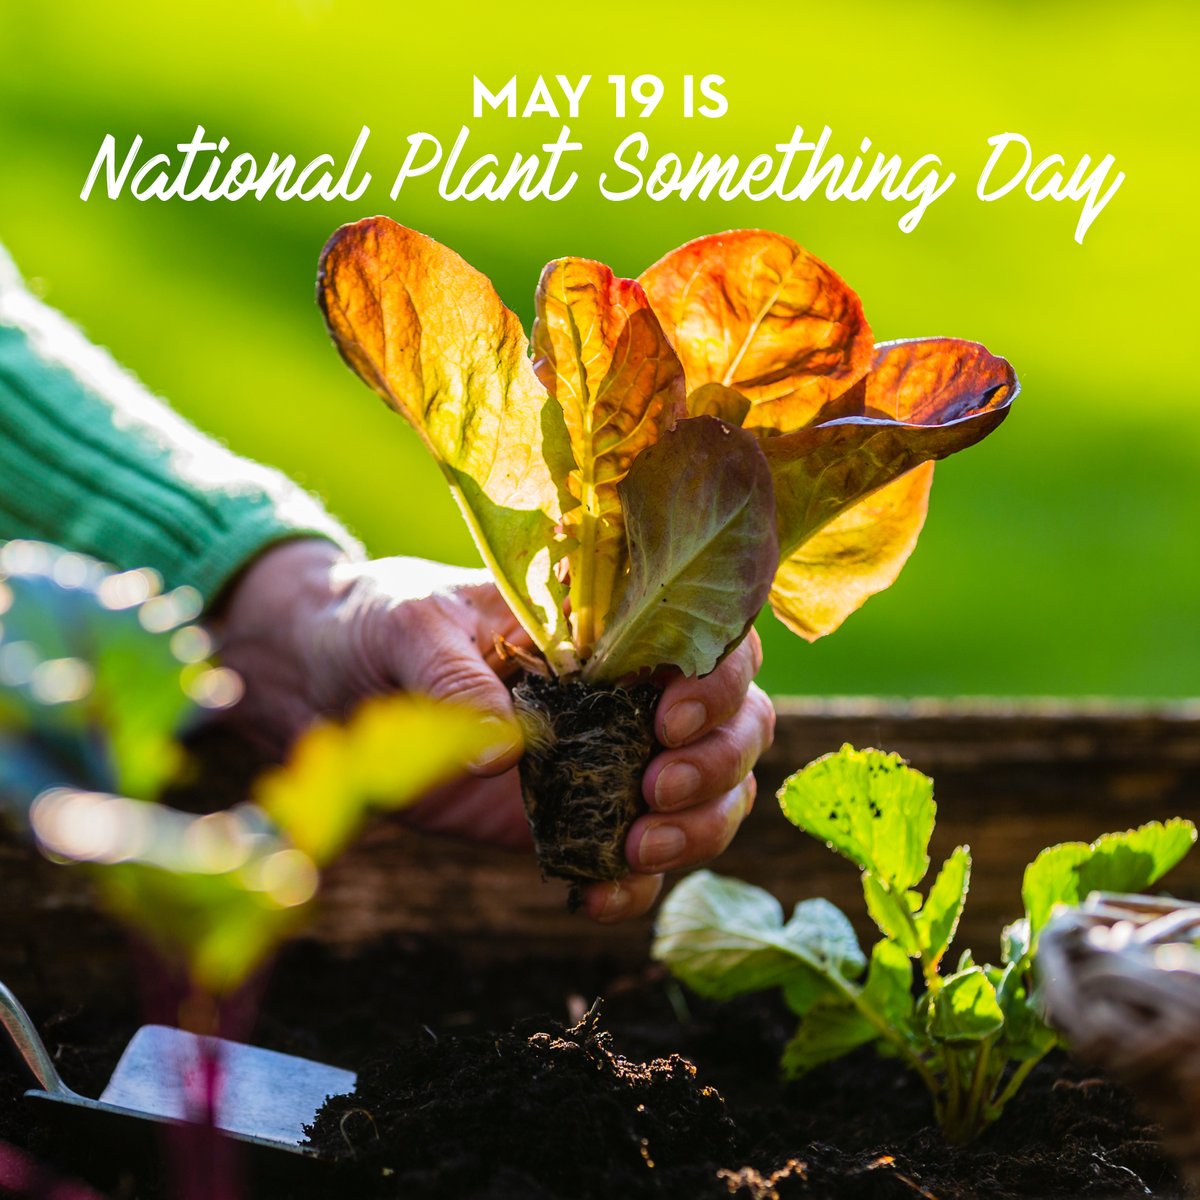 It's National Plant Something Day! To celebrate, we're announcing the return of our free seed and plant distribution! Keep an eye on our socials in the coming days to find out date, time and location info.